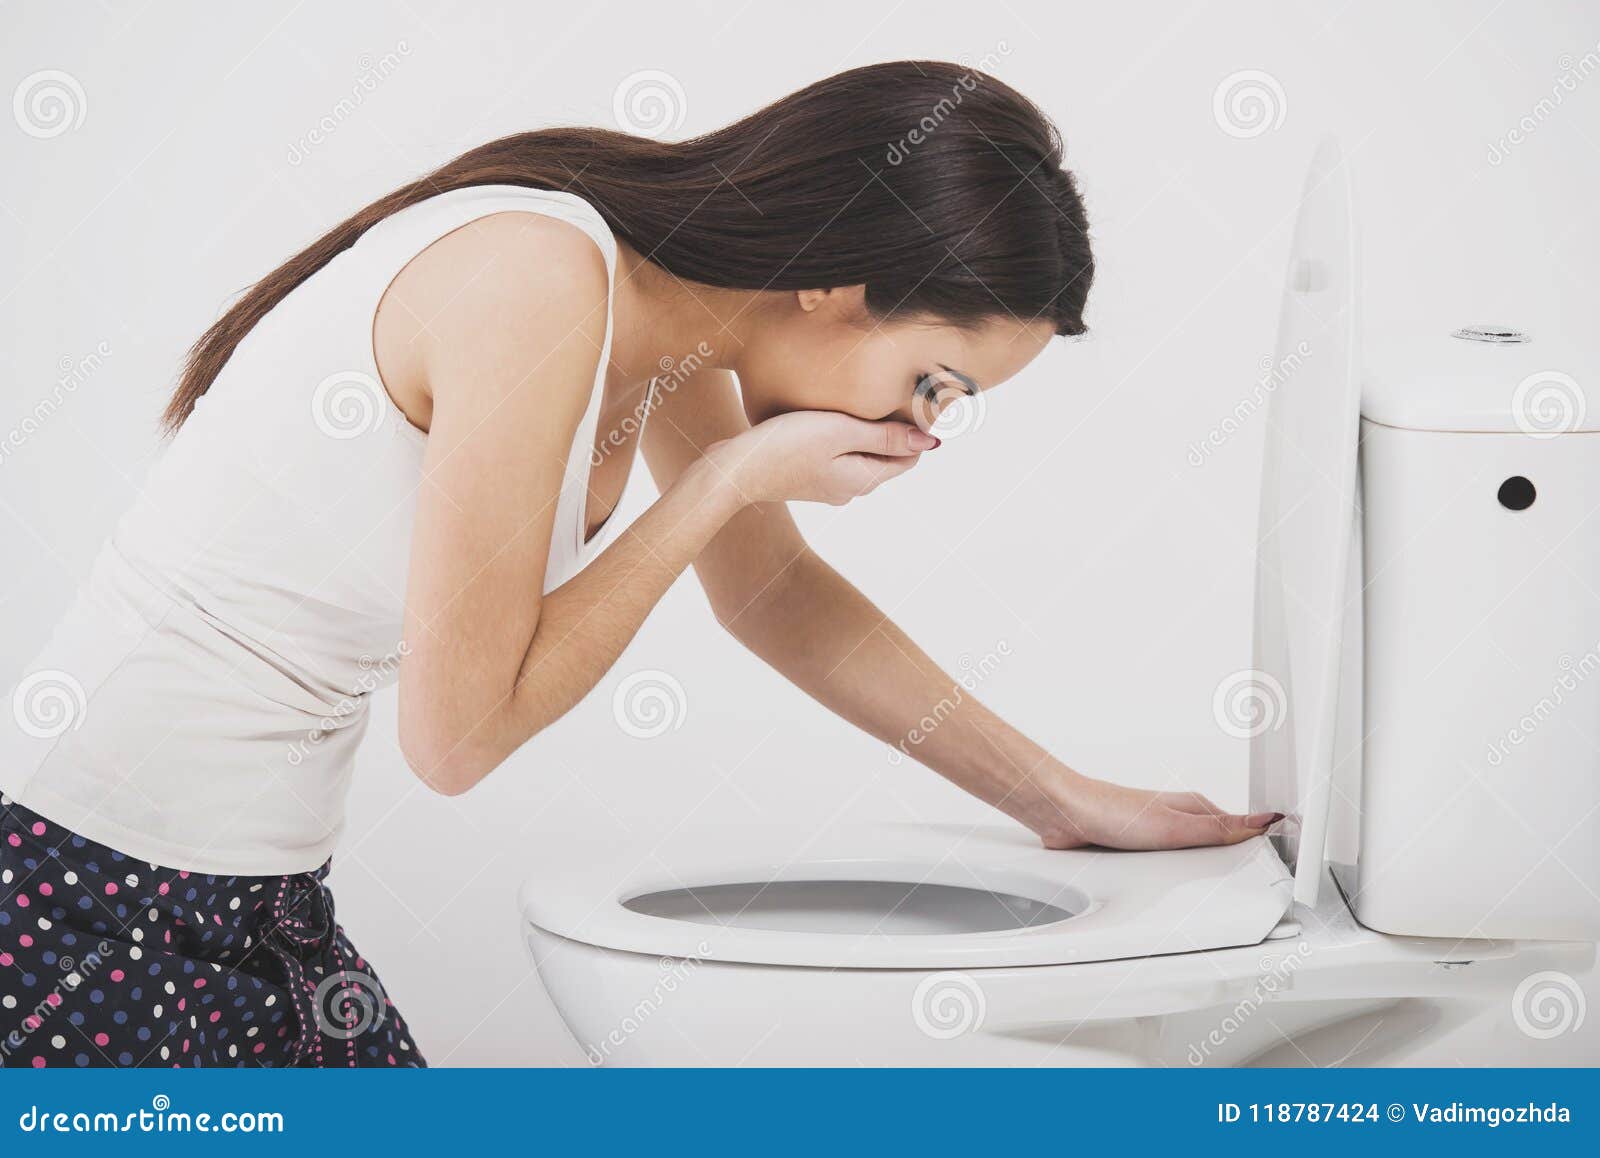 Young Woman Vomiting Into Toilet Bowl Stock Photo (Edit 